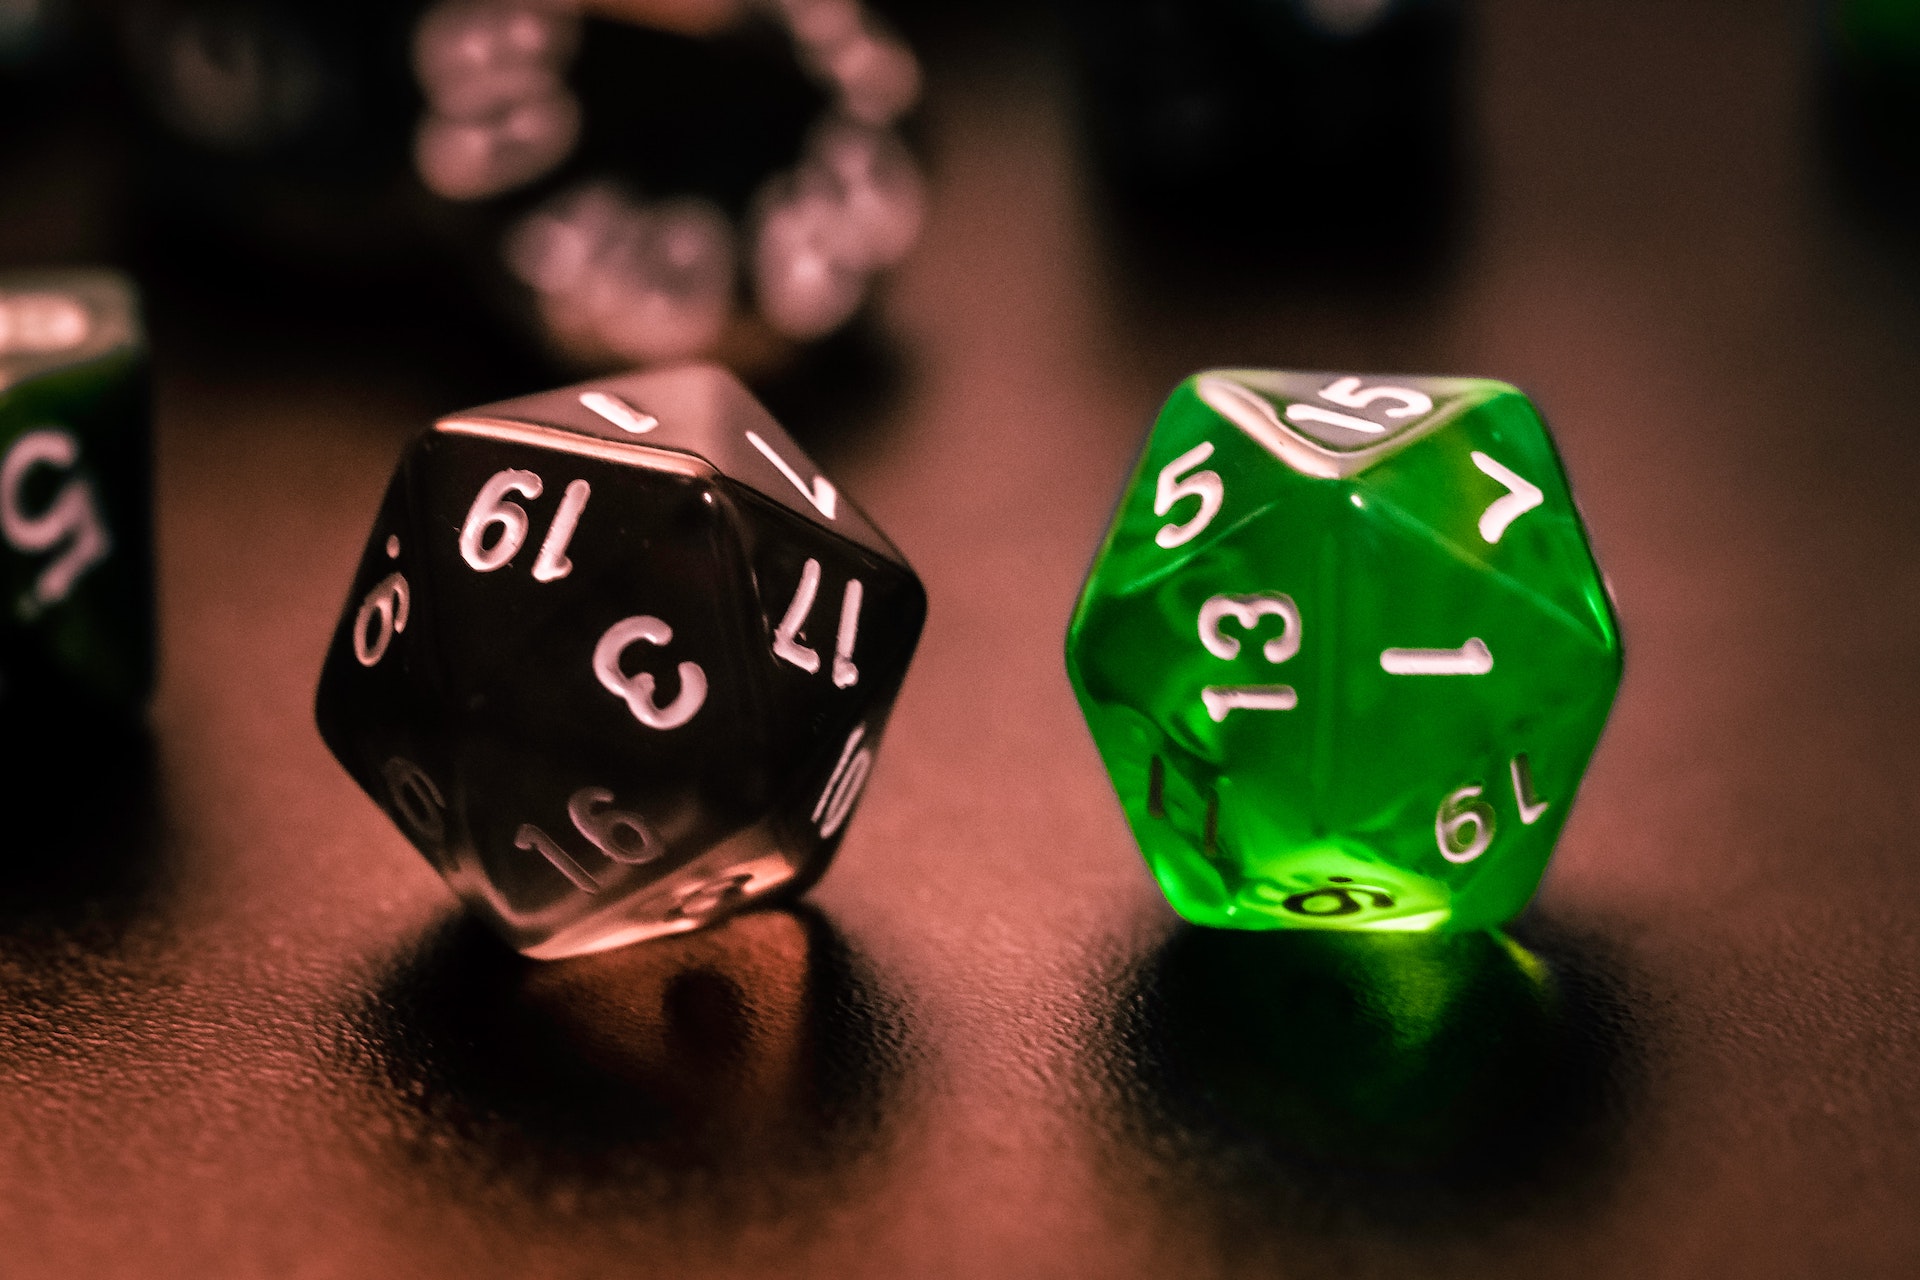 A couple of d20 dice. One black, landed on a one. The other one green, landed on a 15